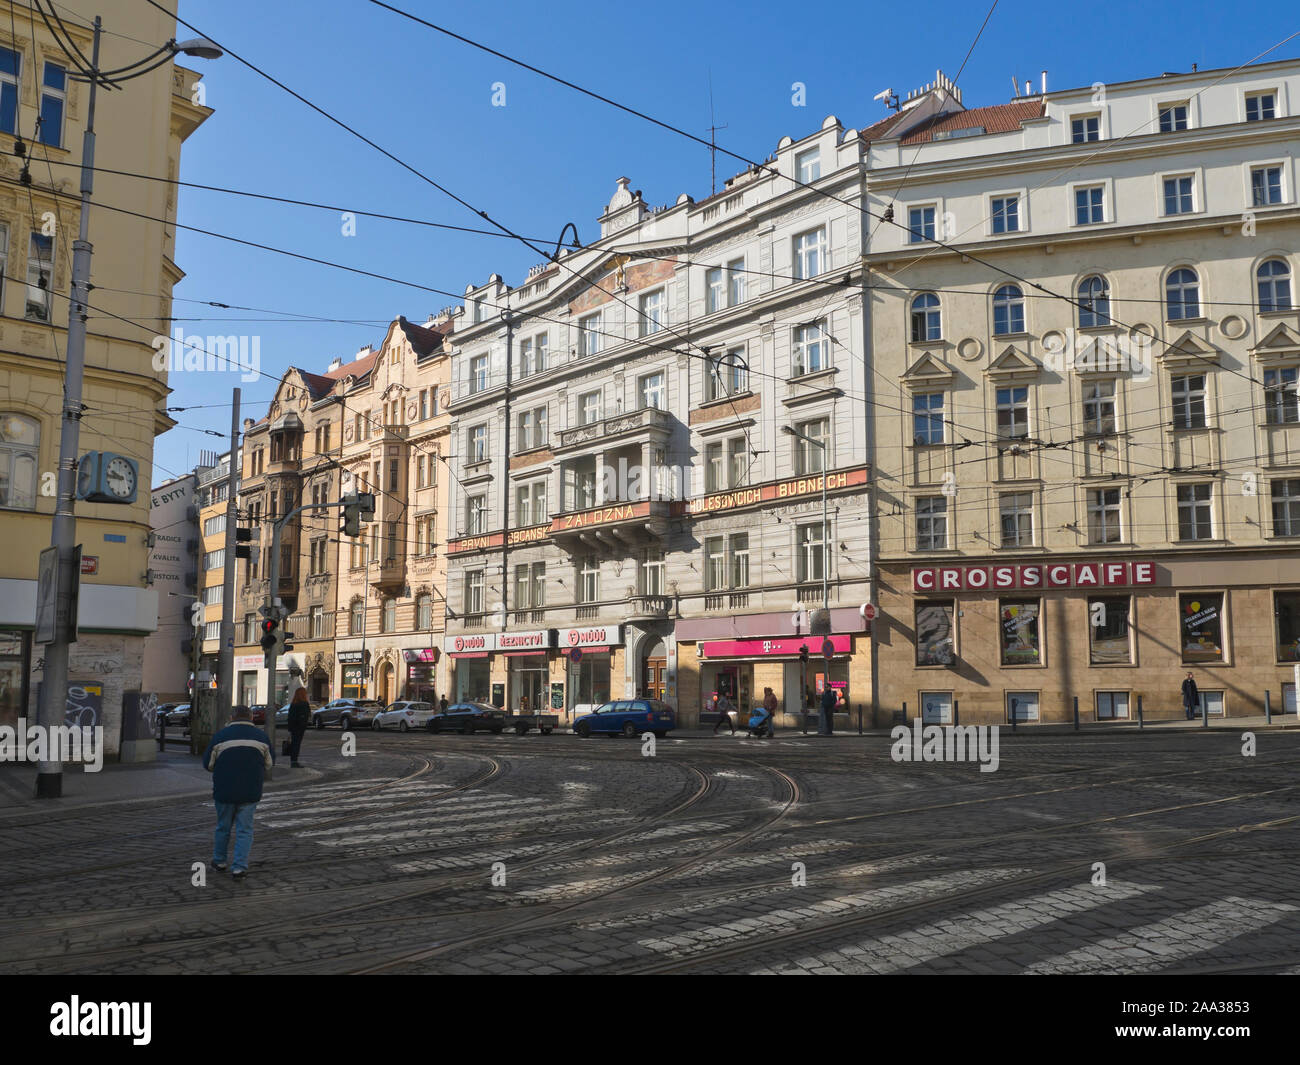 Holesovice Prague High Resolution Stock Photography and Images - Alamy